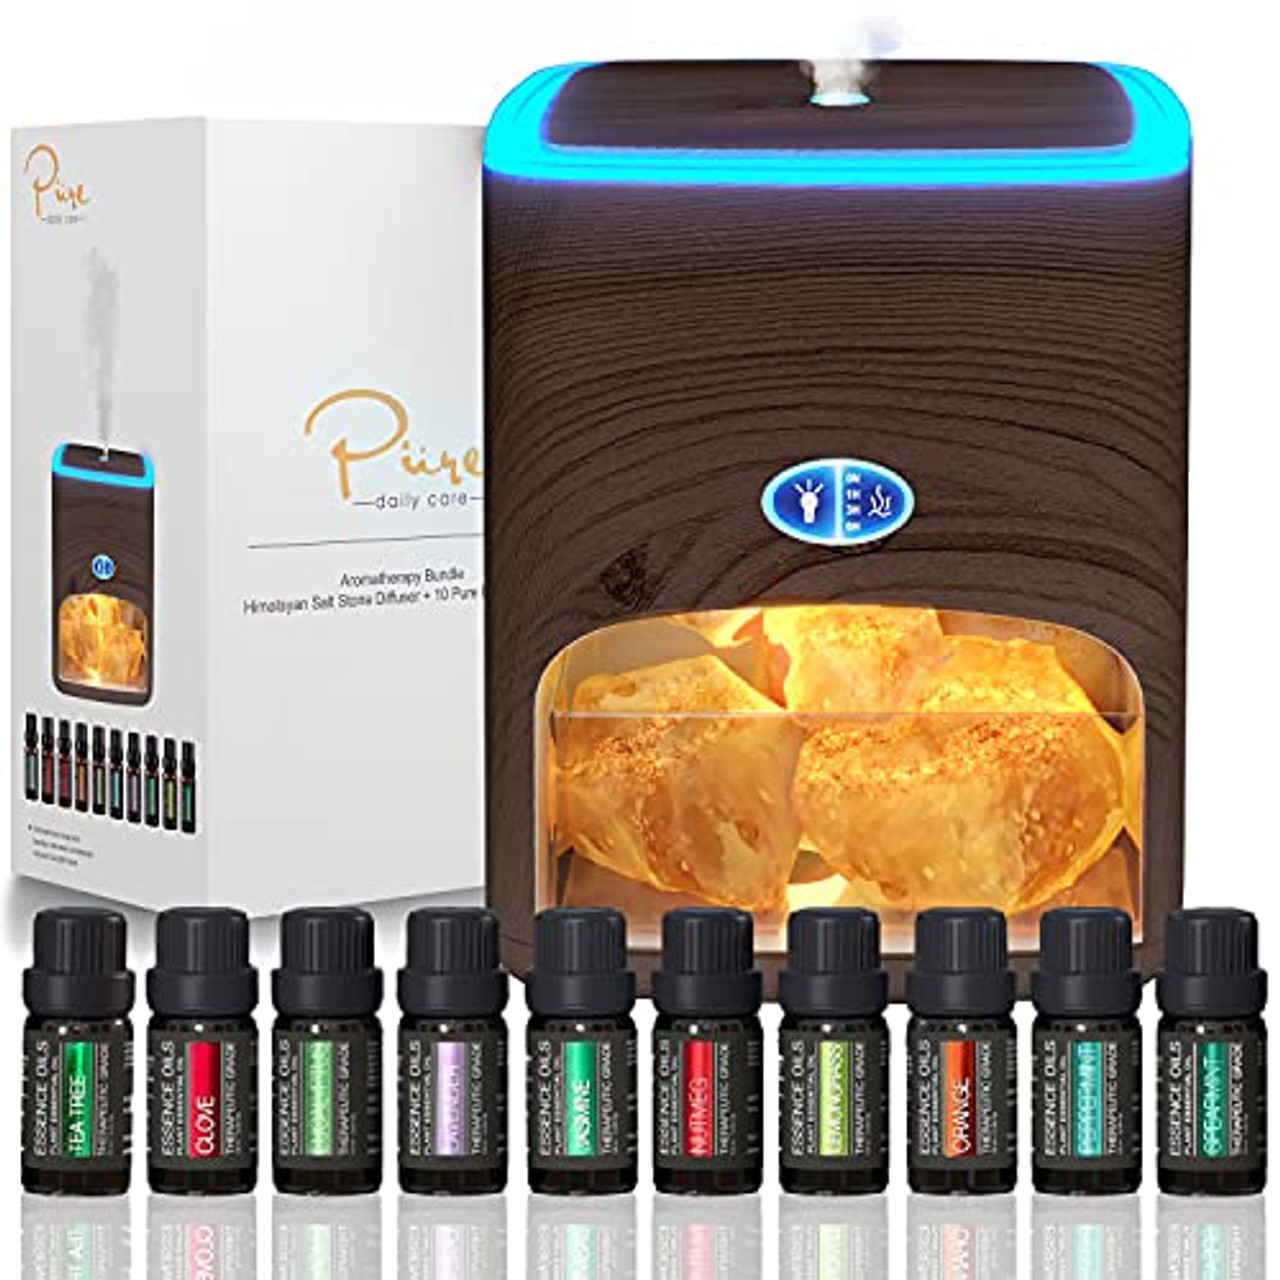 Ultimate Aromatherapy Diffuser & Essential Oil Set - Ultrasonic Diffuser & Top 10 Essential Oils - 300ml Diffuser with 4 Timer & 7 Ambient Light